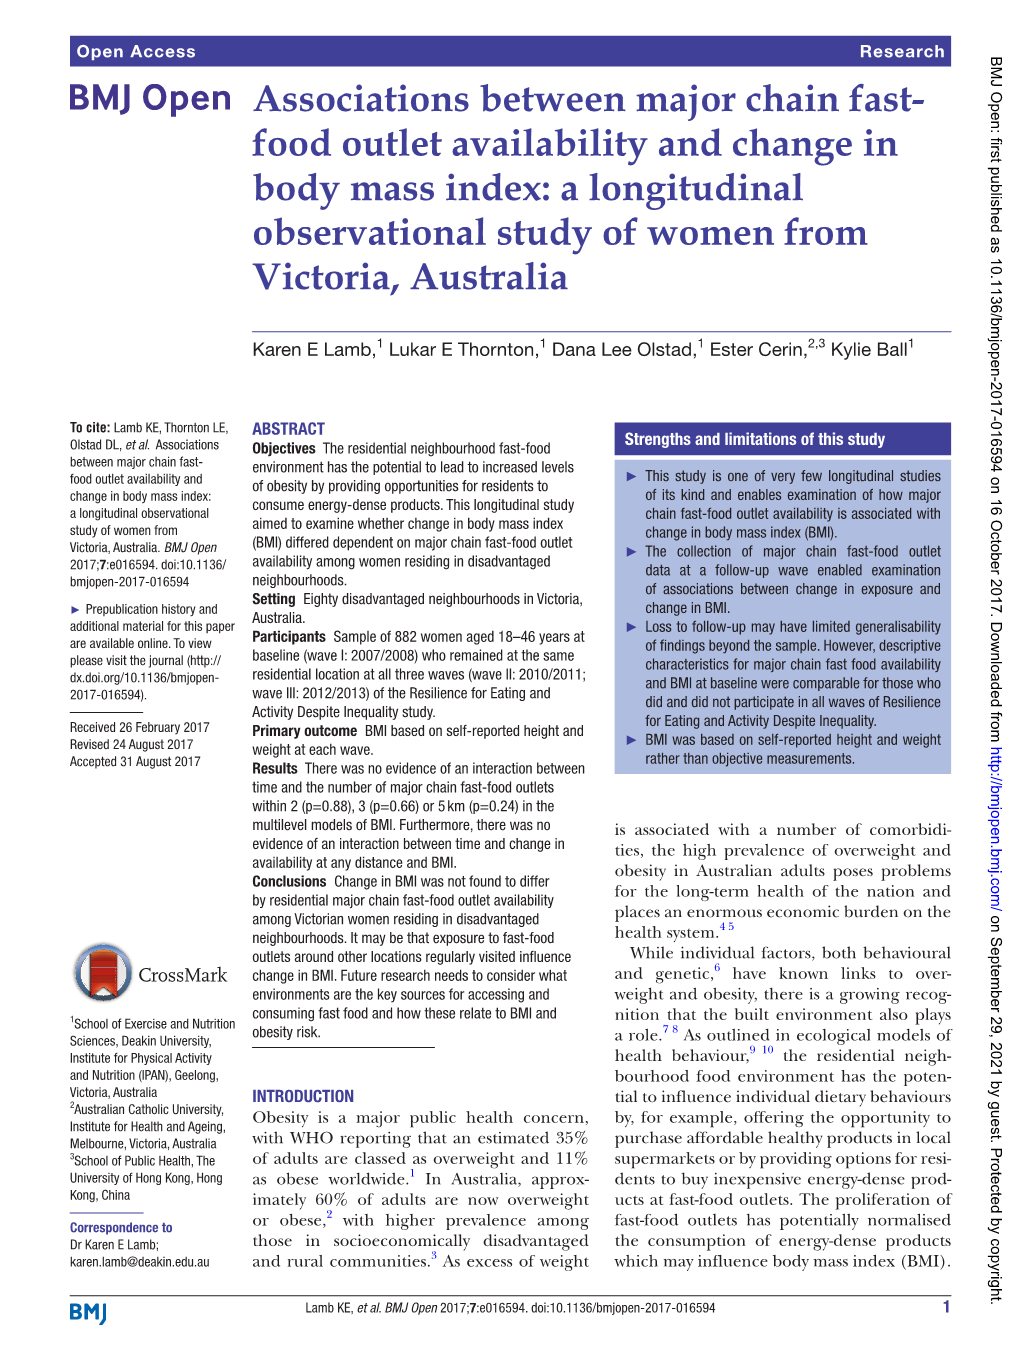 Food Outlet Availability and Change in Body Mass Index: a Longitudinal Observational Study of Women from Victoria, Australia